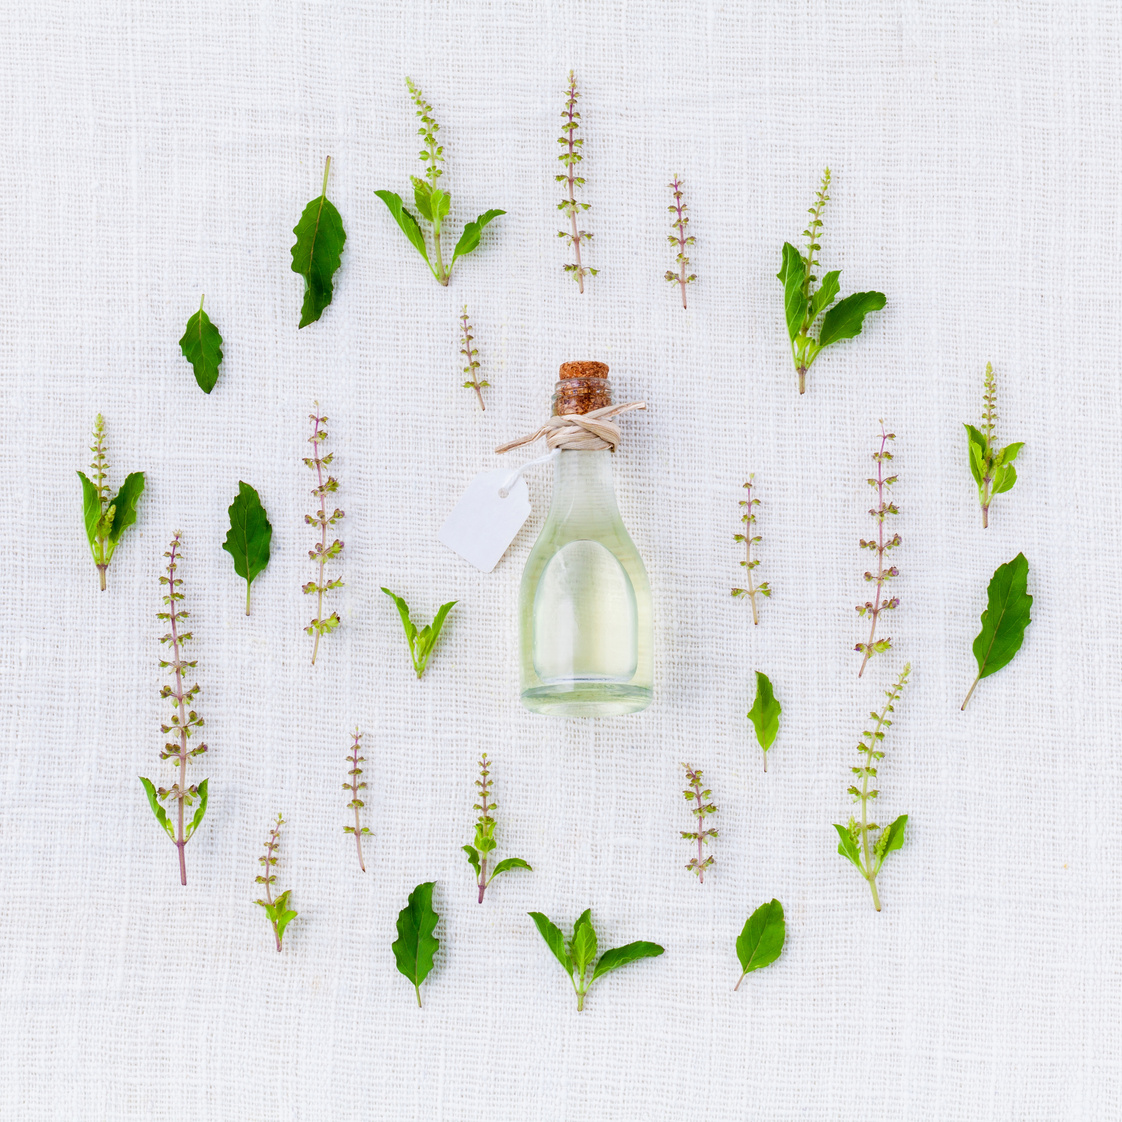 Therapeutic Oil Made from Herbs